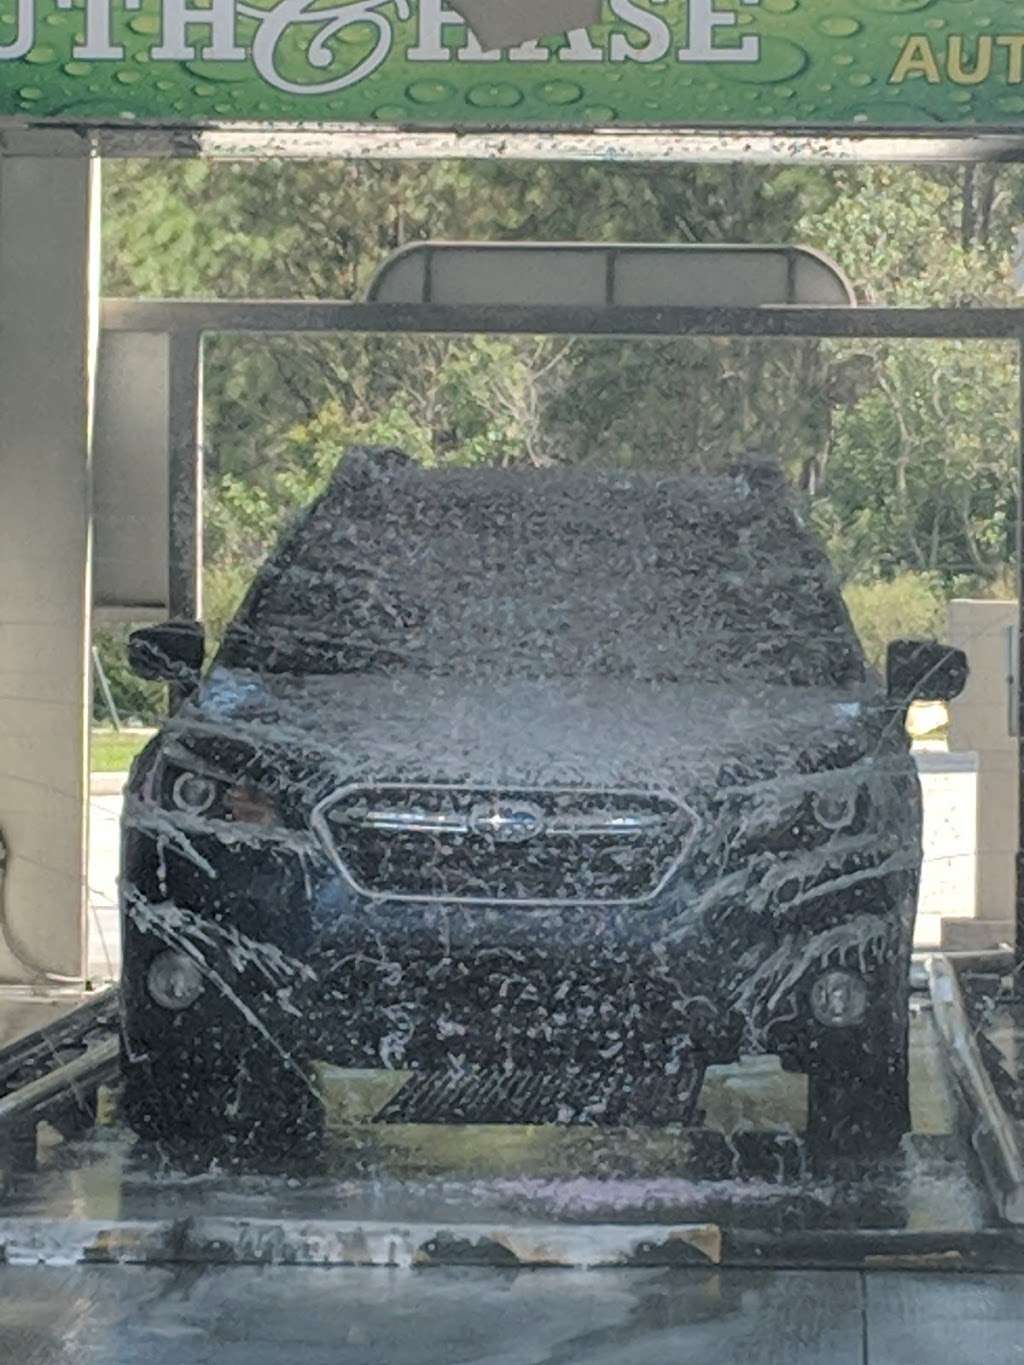 South Chase Carwash | 100 E Wetherbee Rd, Orlando, FL 32824 | Phone: (407) 851-9022